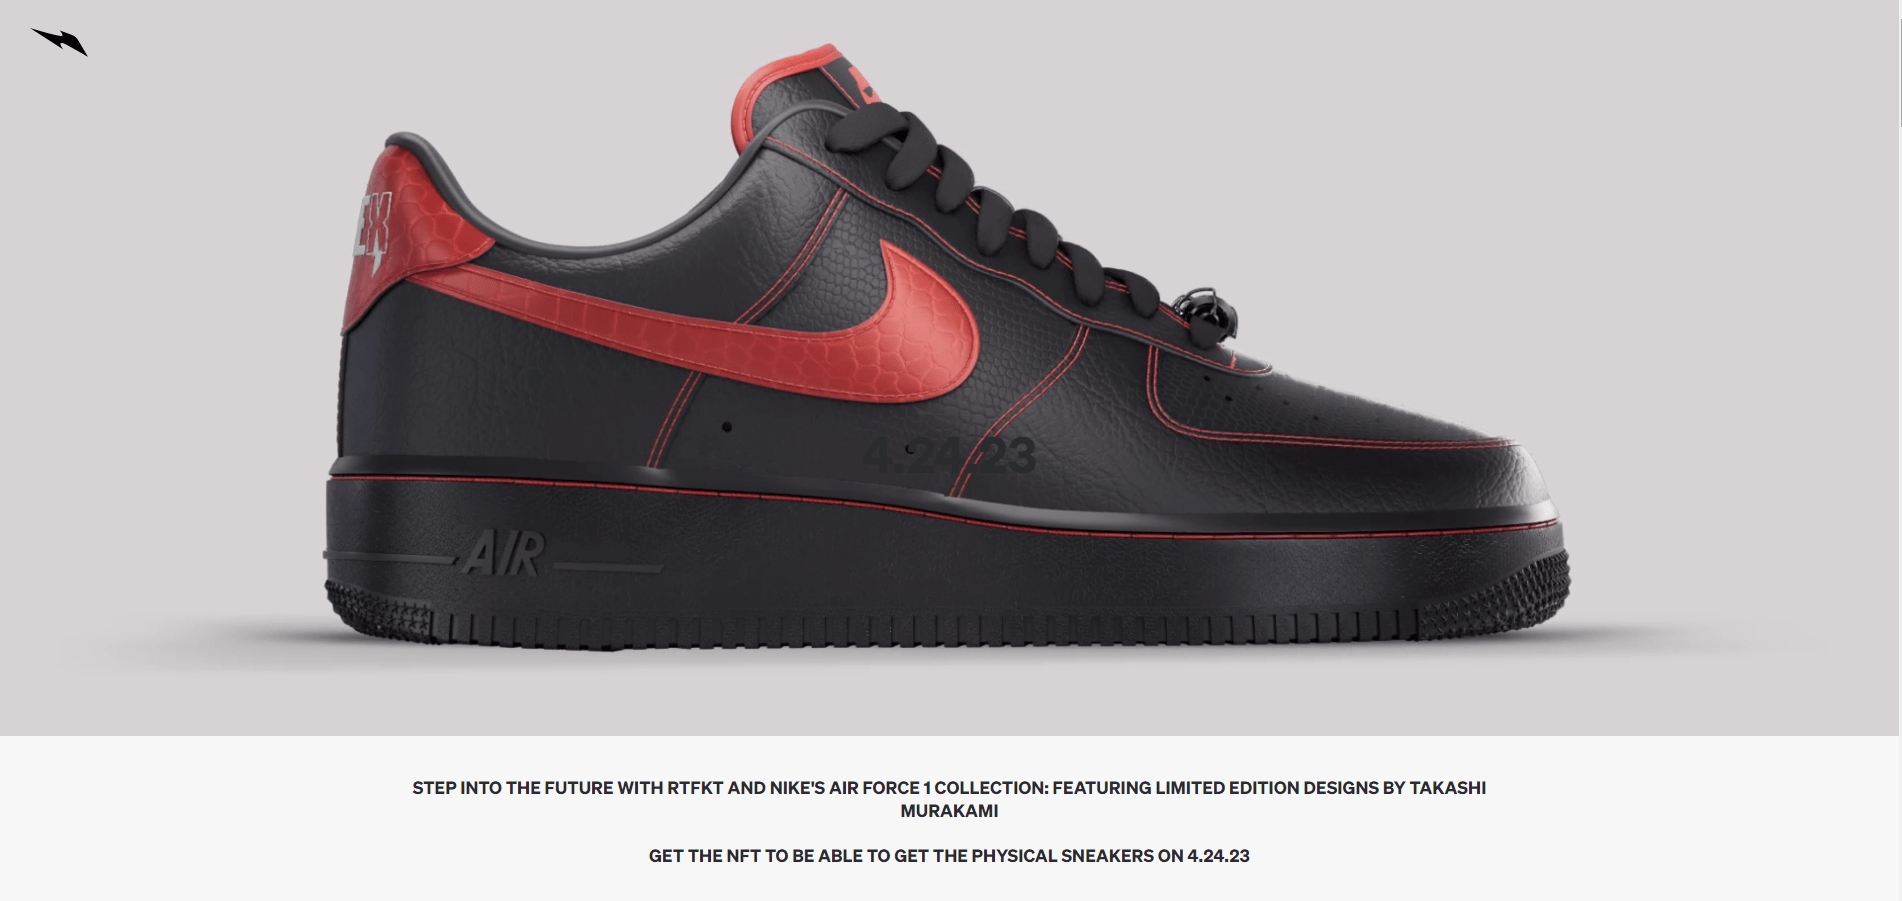 RTFKT and Nike Announced Real NFT Air Force 1 Sneakers